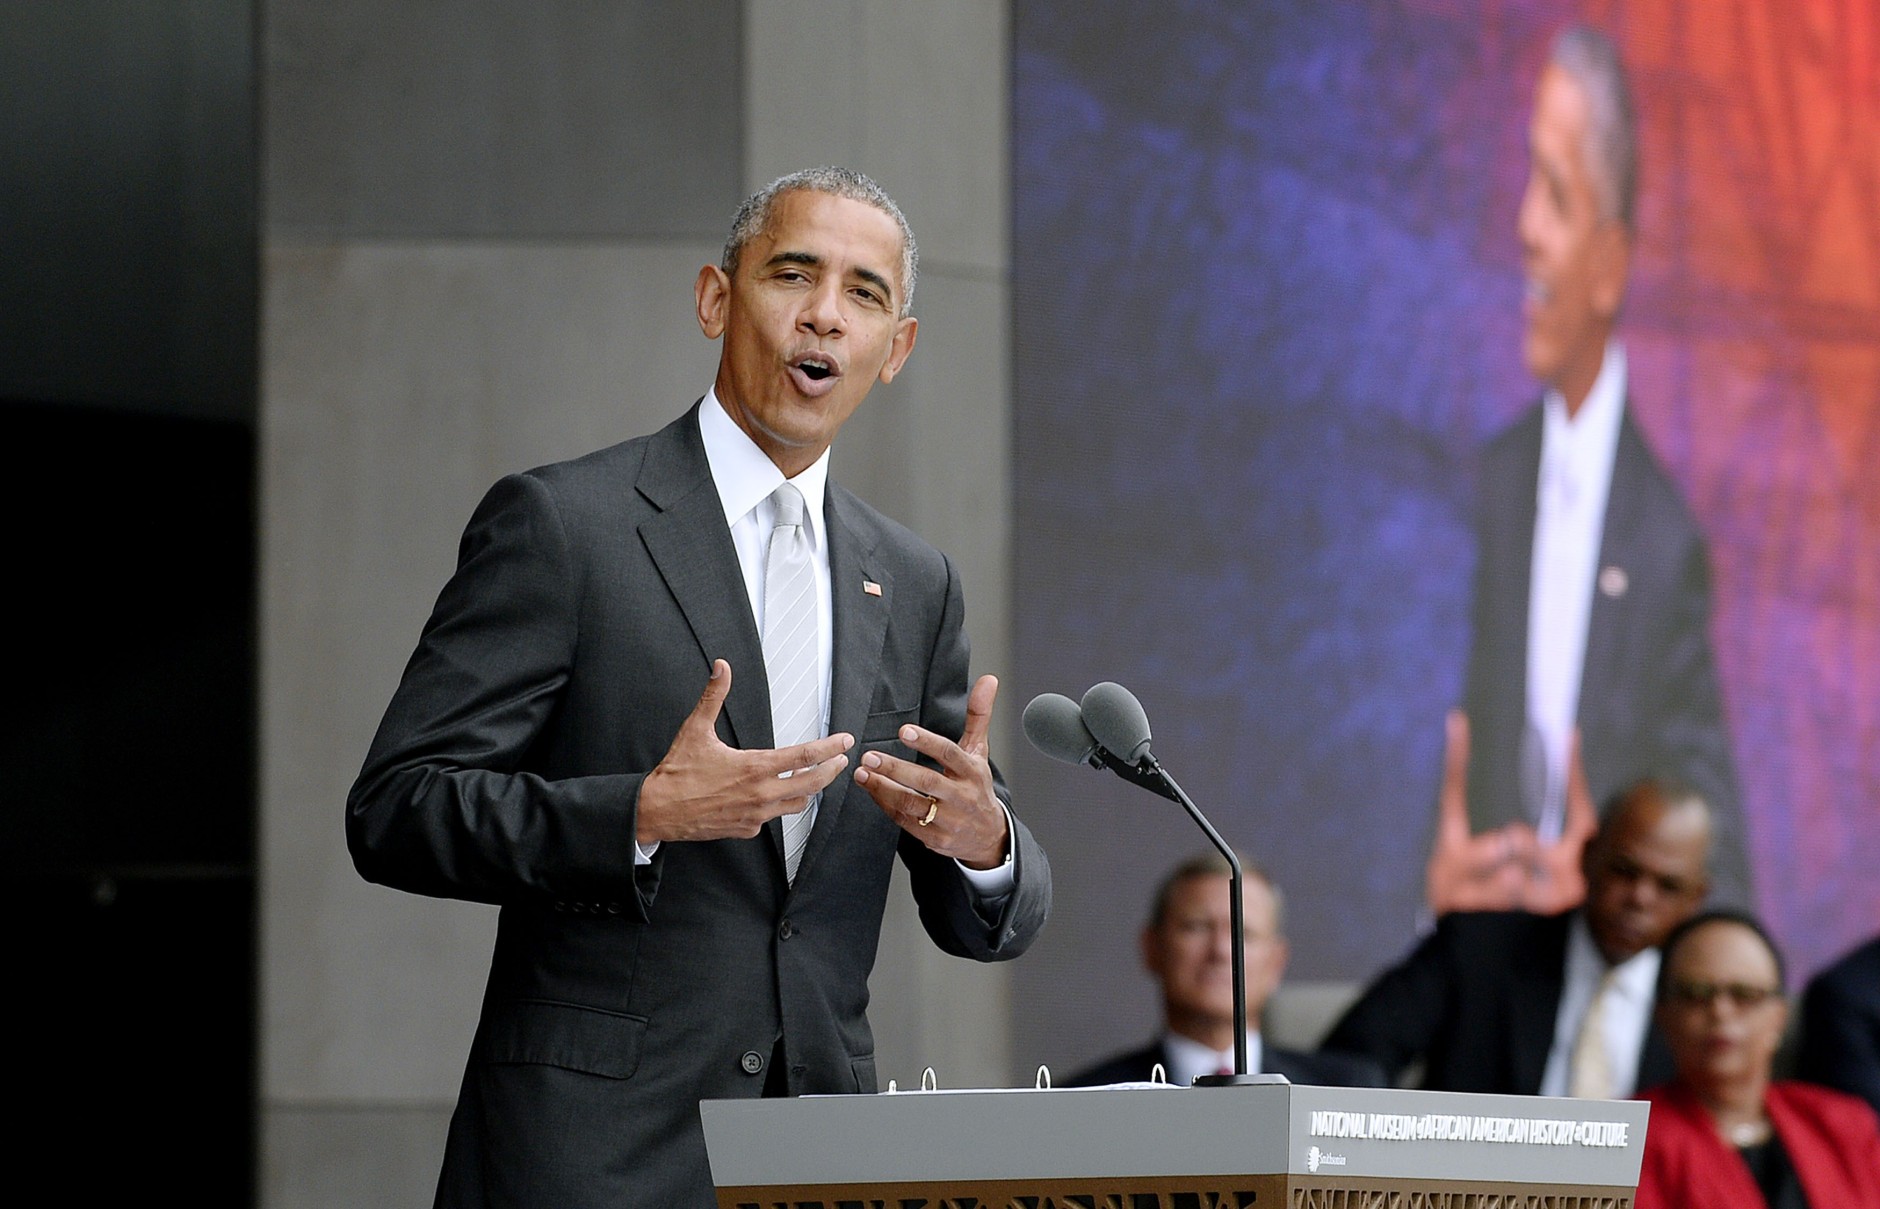 President Barack Obama speaks at the opening ceremony of the Smithsonian National Museum of African American History and Culture on Sept. 24, 2016 in Washington, D.C. The museum is opening thirteen years after Congress and President George W. Bush authorized its construction.  (Photo by Olivier Douliery-Pool/Getty Images)